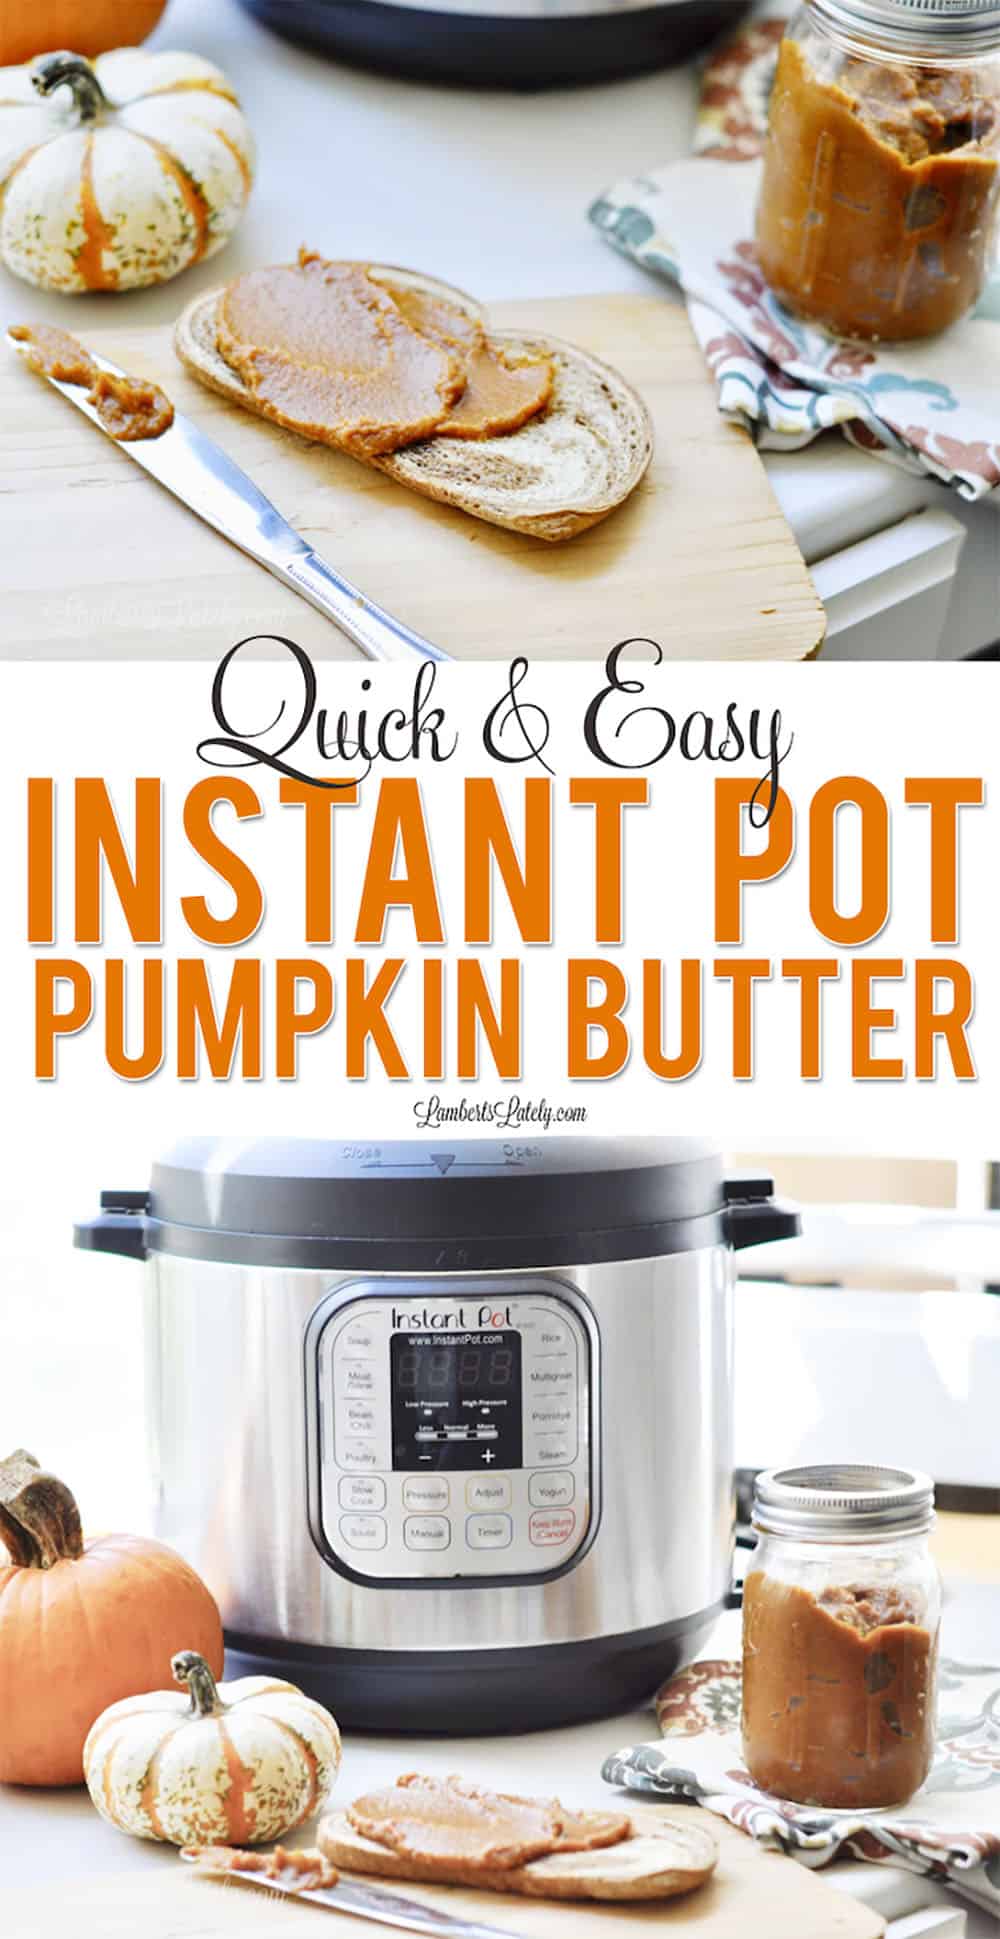 This recipe for quick & easy homemade Instant Pot Pumpkin Butter uses a few really simple ingredients (like pumpkin puree, cinnamon, and maple syrup) to make a delicious topping for desserts of breakfasts. Close copycat of the Trader Joe's version!